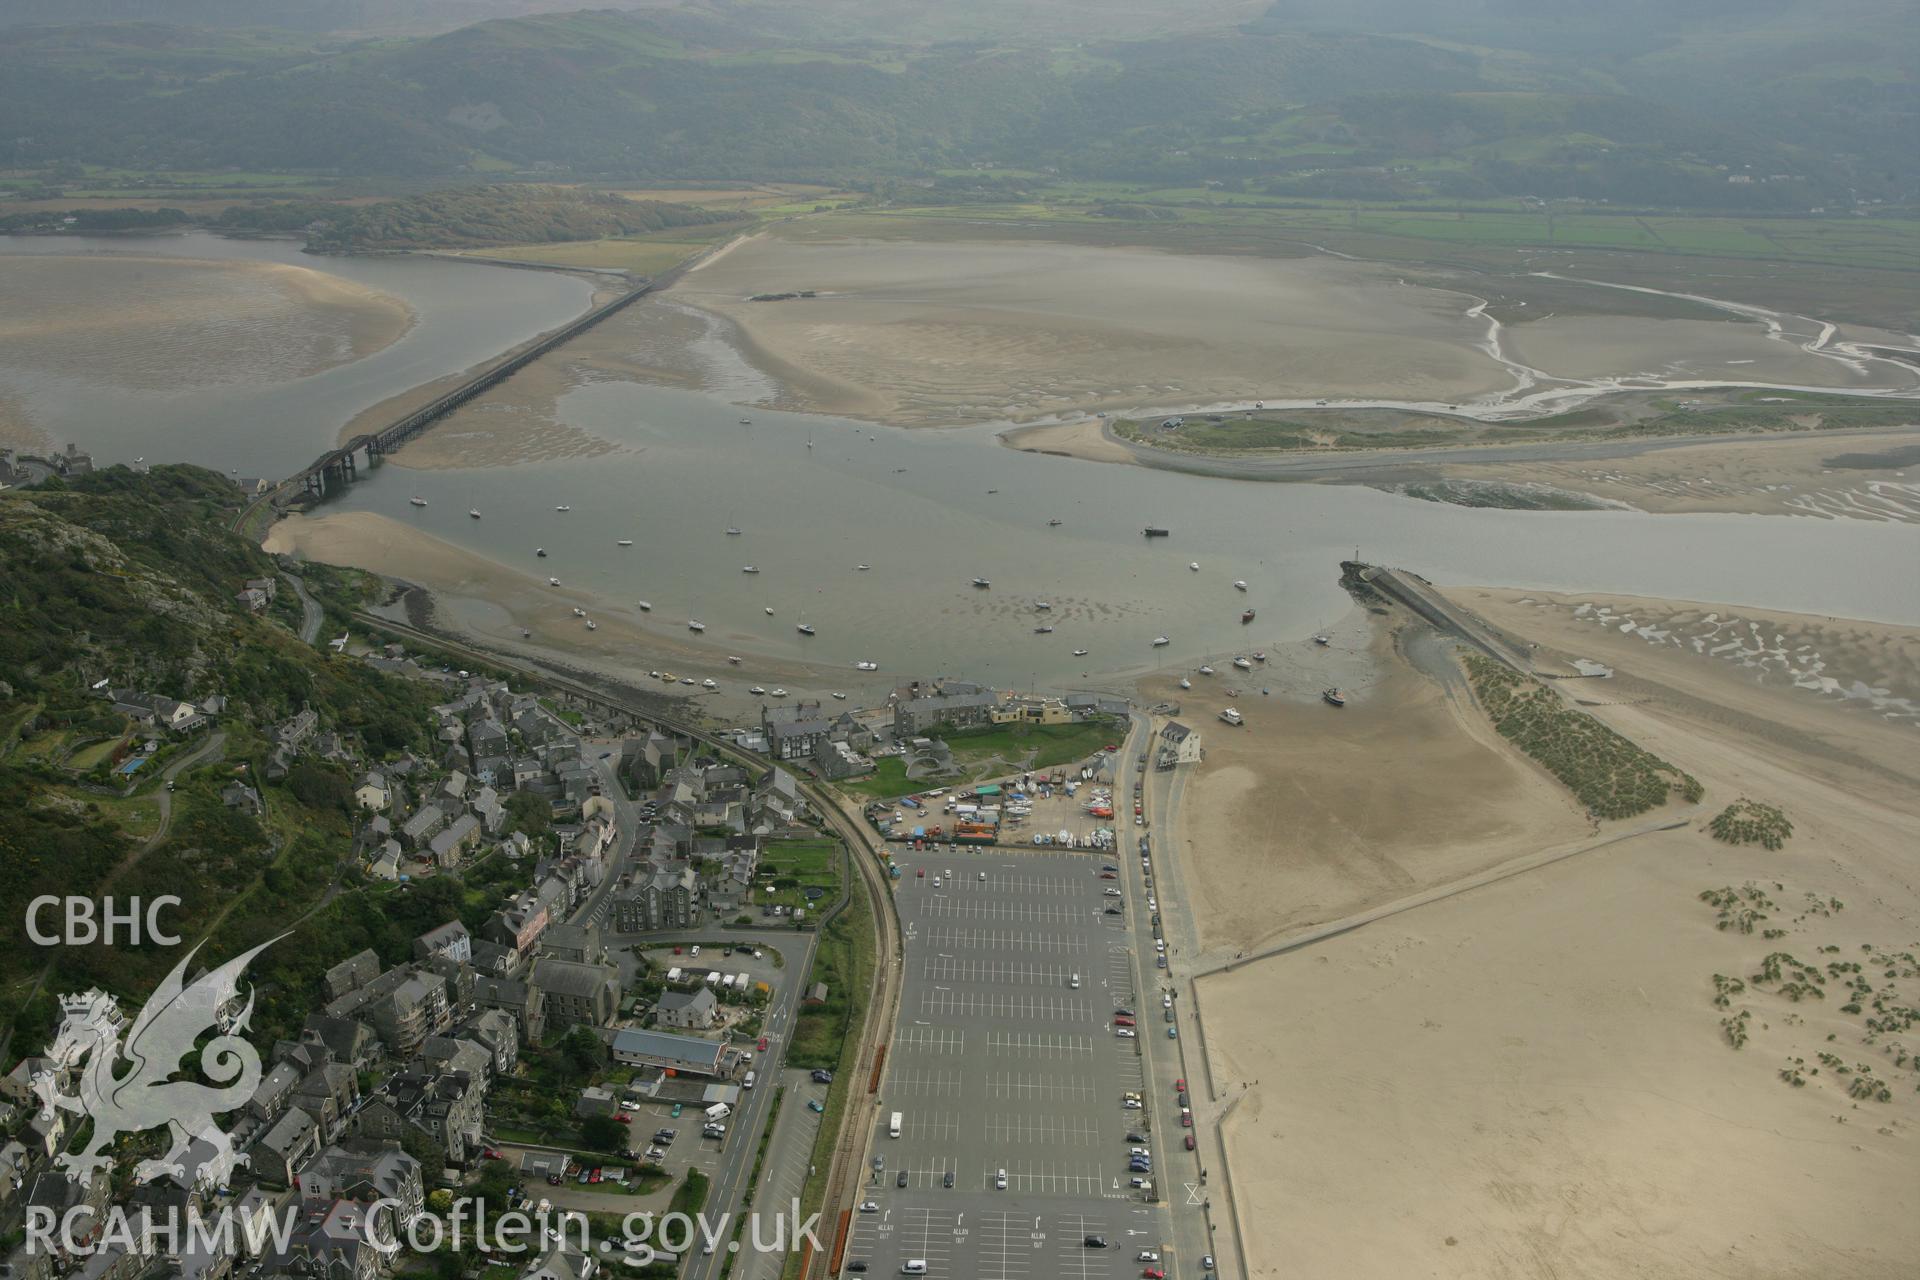 RCAHMW colour oblique photograph of Barmouth;Abermaw, view from the North West. Taken by Toby Driver on 08/10/2007.